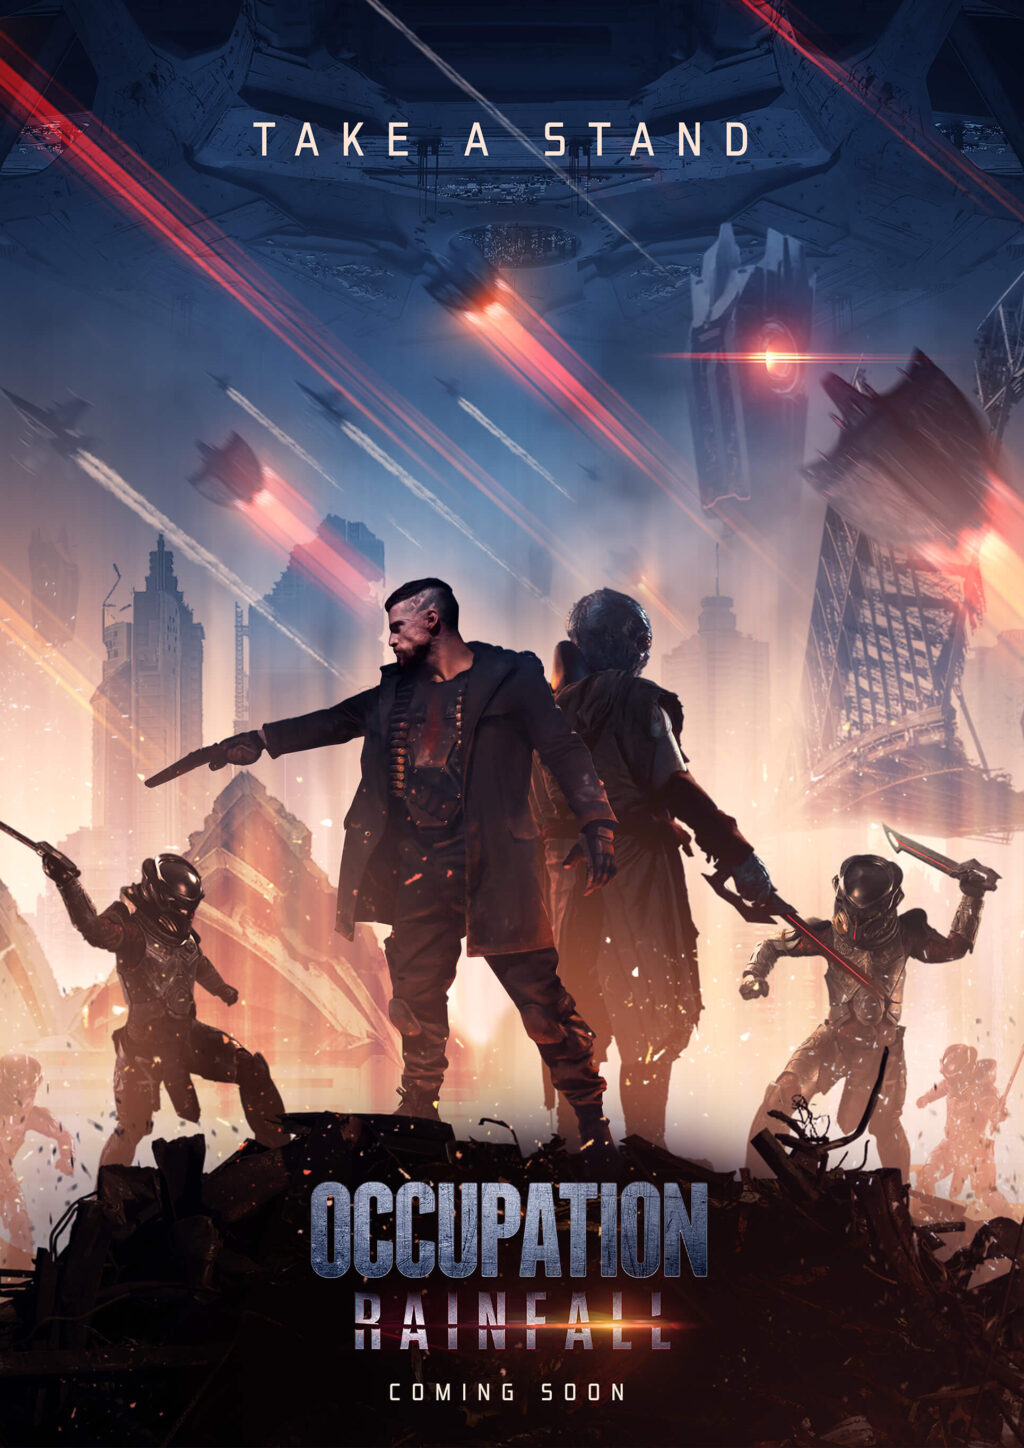 Occupation Rainfall Poster 1 1024x1448 - Writer and director Luke Sparke talks about Occupation: Rainfall [Exclusive Interview]